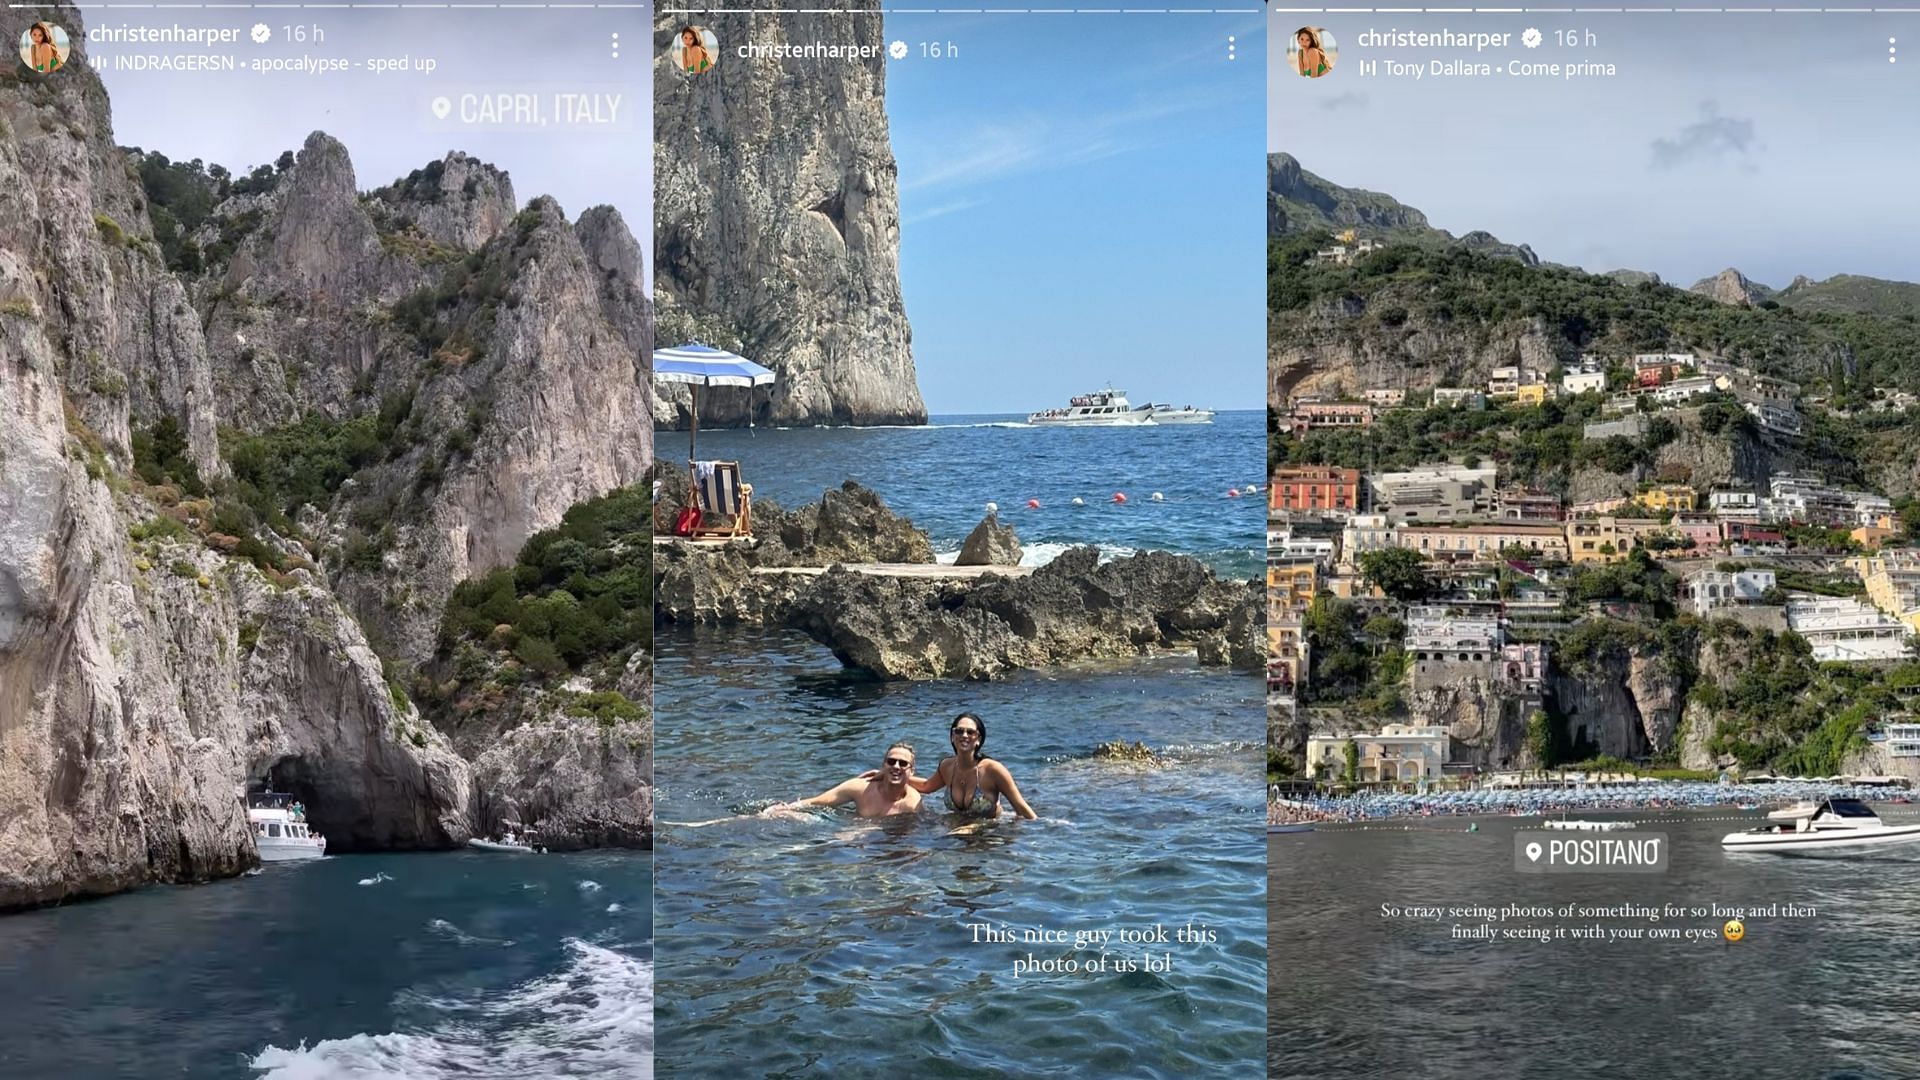 Quarterback Jared Goff went with his fiancee, swimsuit model Christen Harper, to a beach getaway in Italy after the Detroit Lions&#039; mandatory minicamp. (Image via Instagram/christenharper)